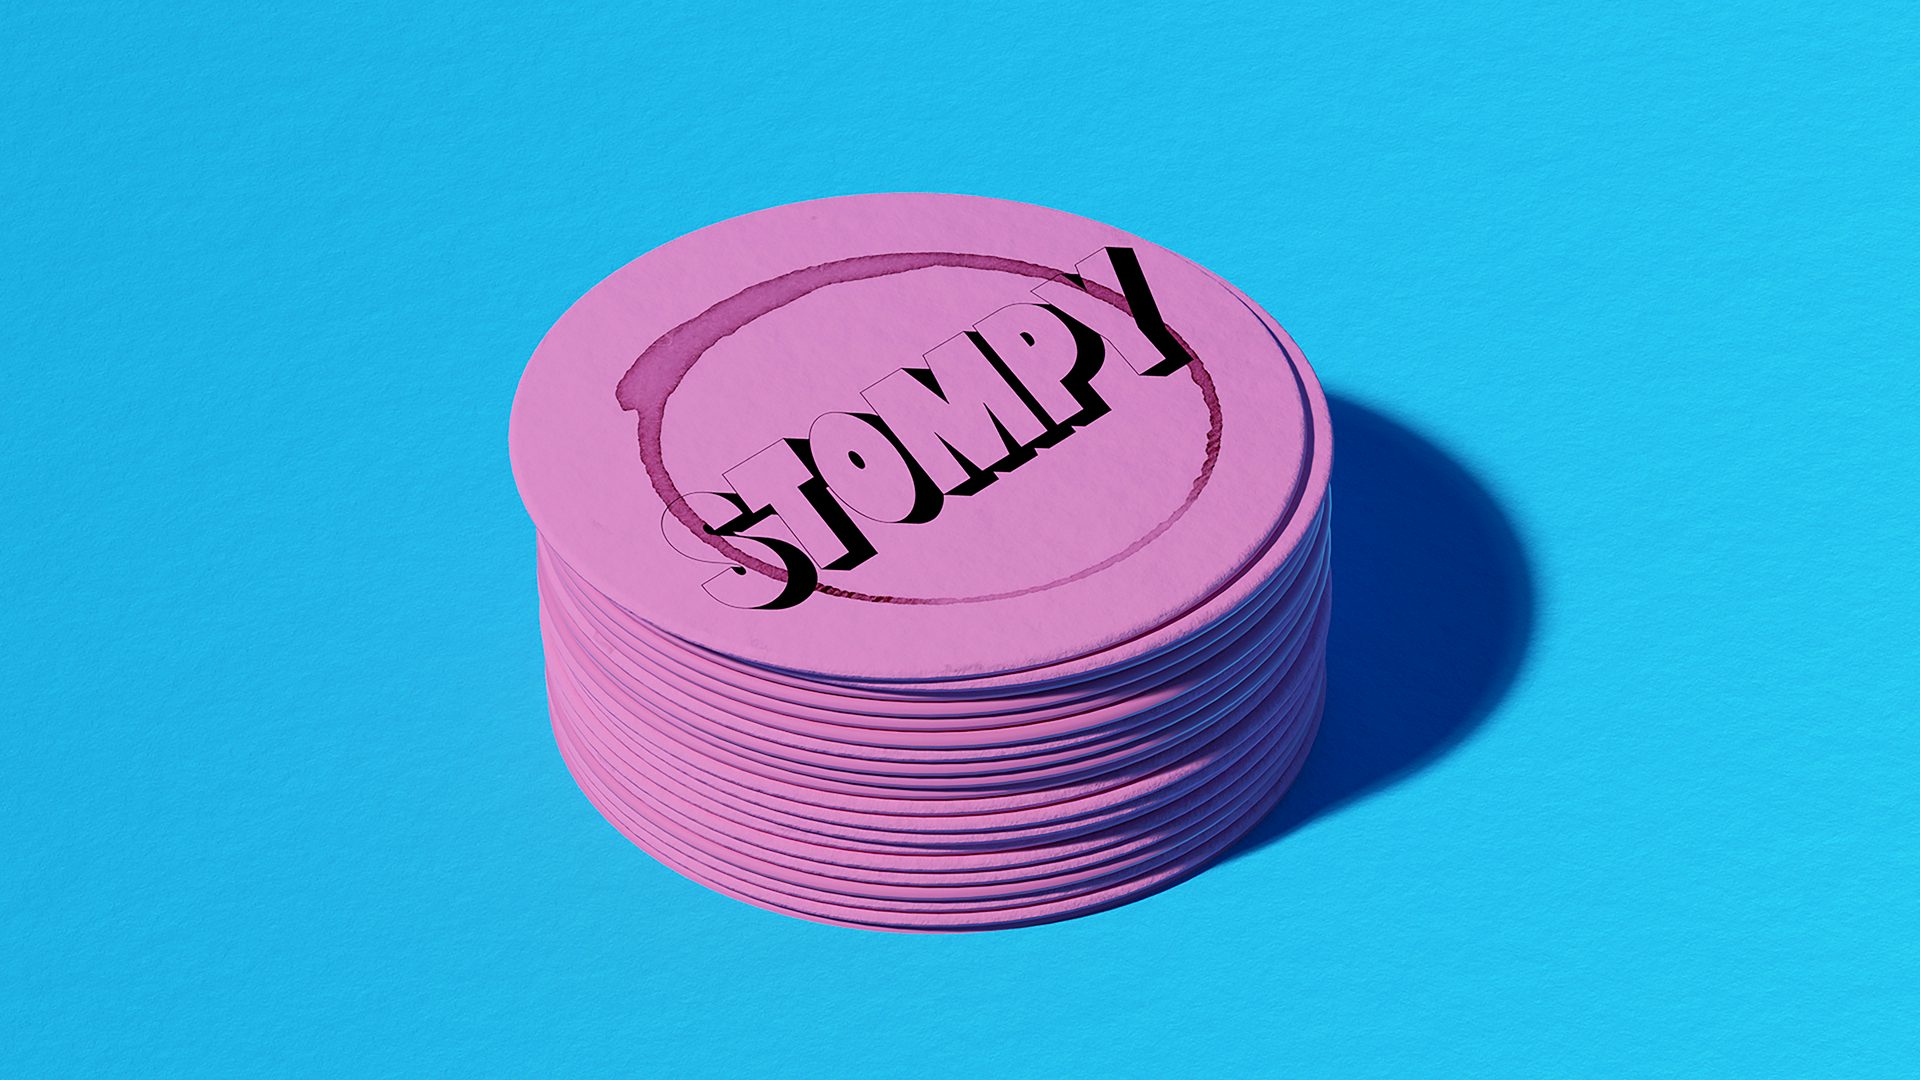 Photograph of a stack of pink coasters with Stompy branding by &Walsh